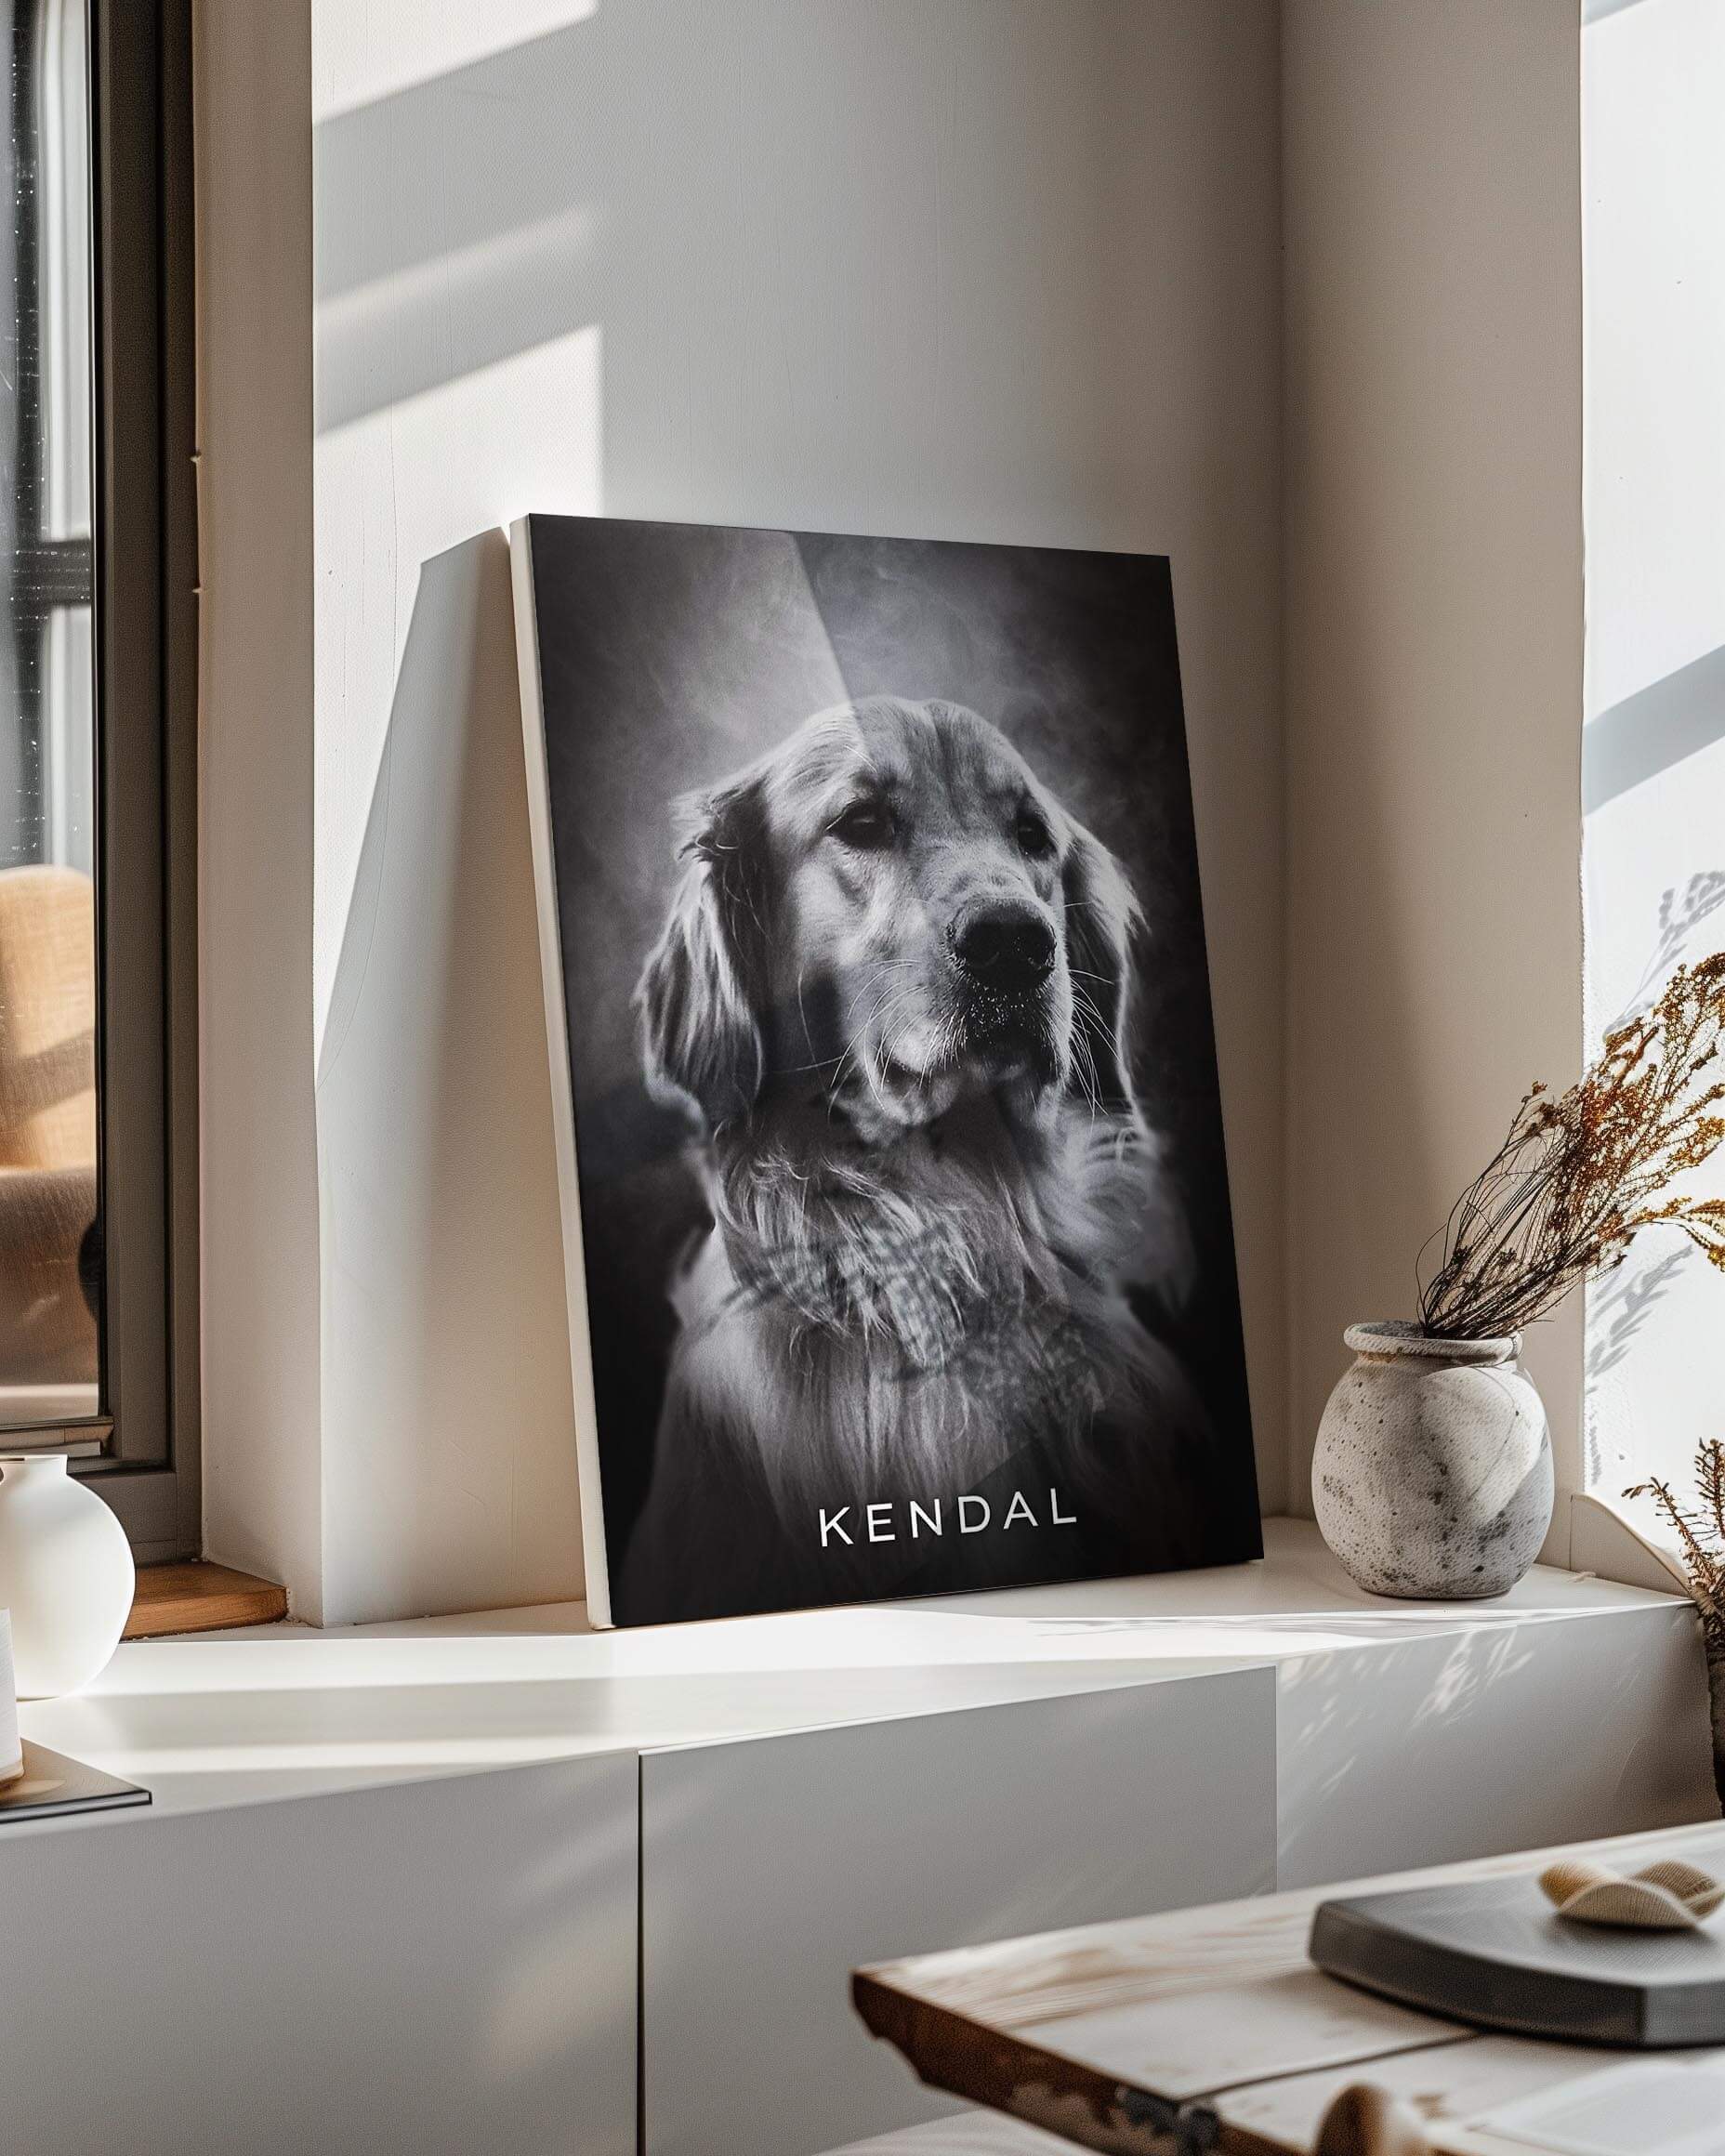 black and white art print of golden retriever on canvas against wall in modern home decor design gift idea to dog mom or dog dad pet parents personalized pet portrait created by Vogue Paws dog art